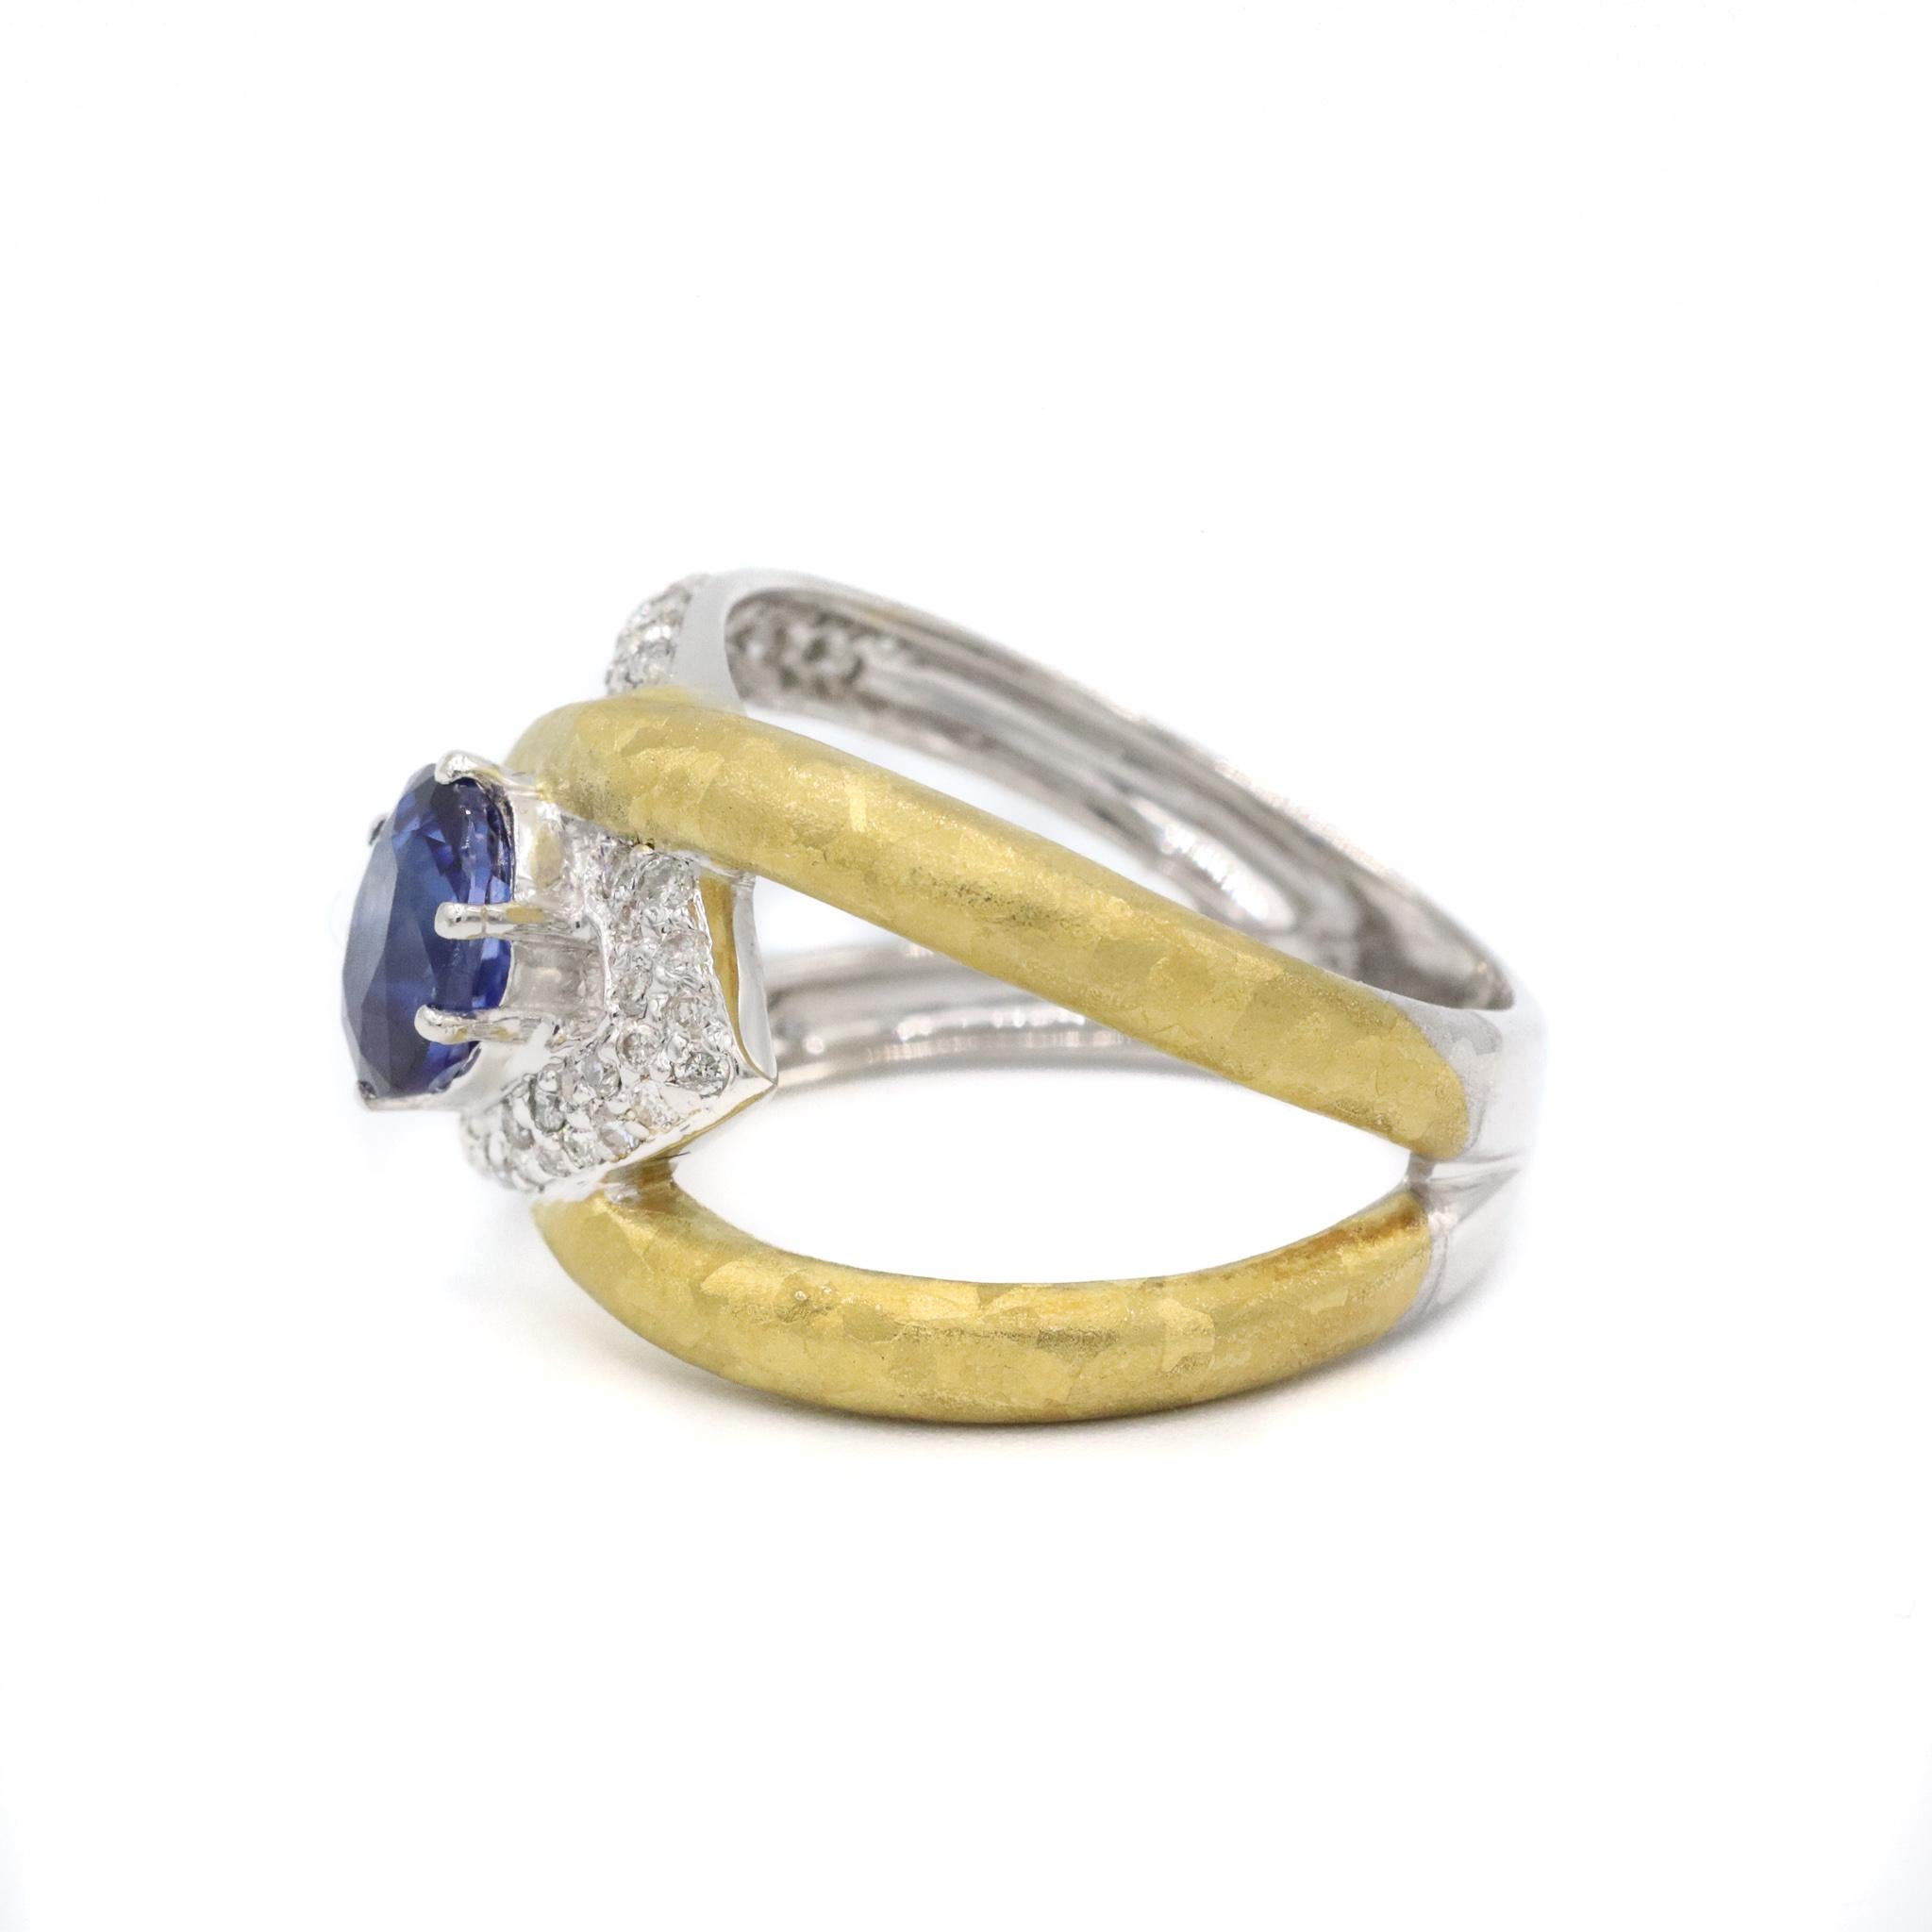 One lady's hand made brushed & polished rhodium plated, gold plated 18K white & yellow gold, sapphire and diamond vintage ring with a split-shank. The ring is a size 6.5. The ring weighs a total of 6.50 grams. Stamped 